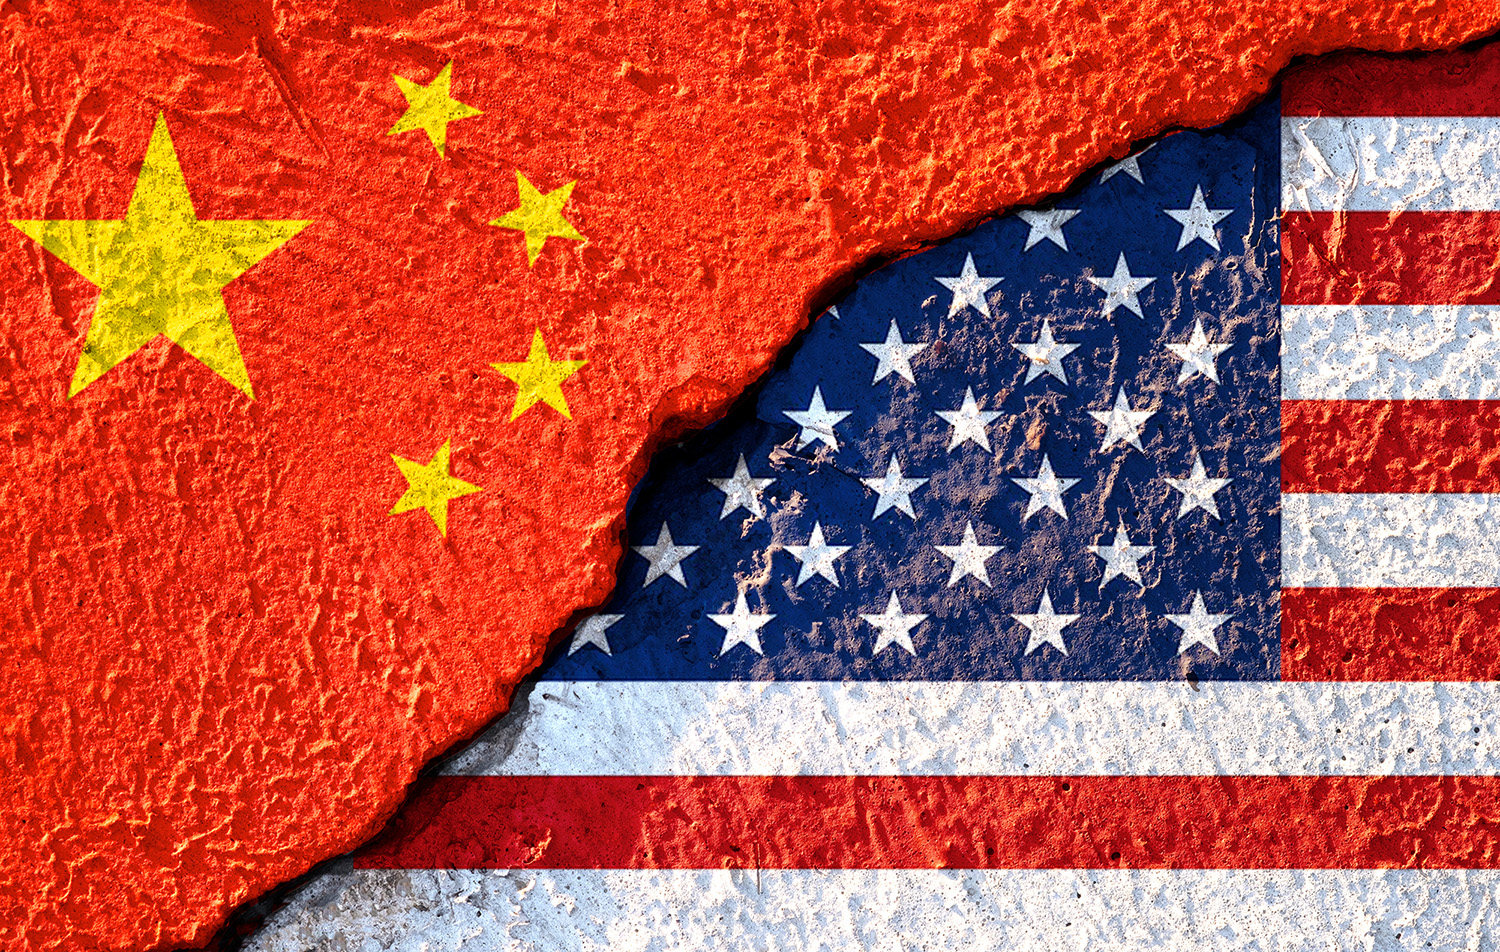 With US President Joe Biden looking to cool inflation, some trade analysts say the time has come to lift punishing tariffs on Chinese goods. Image: Shutterstock